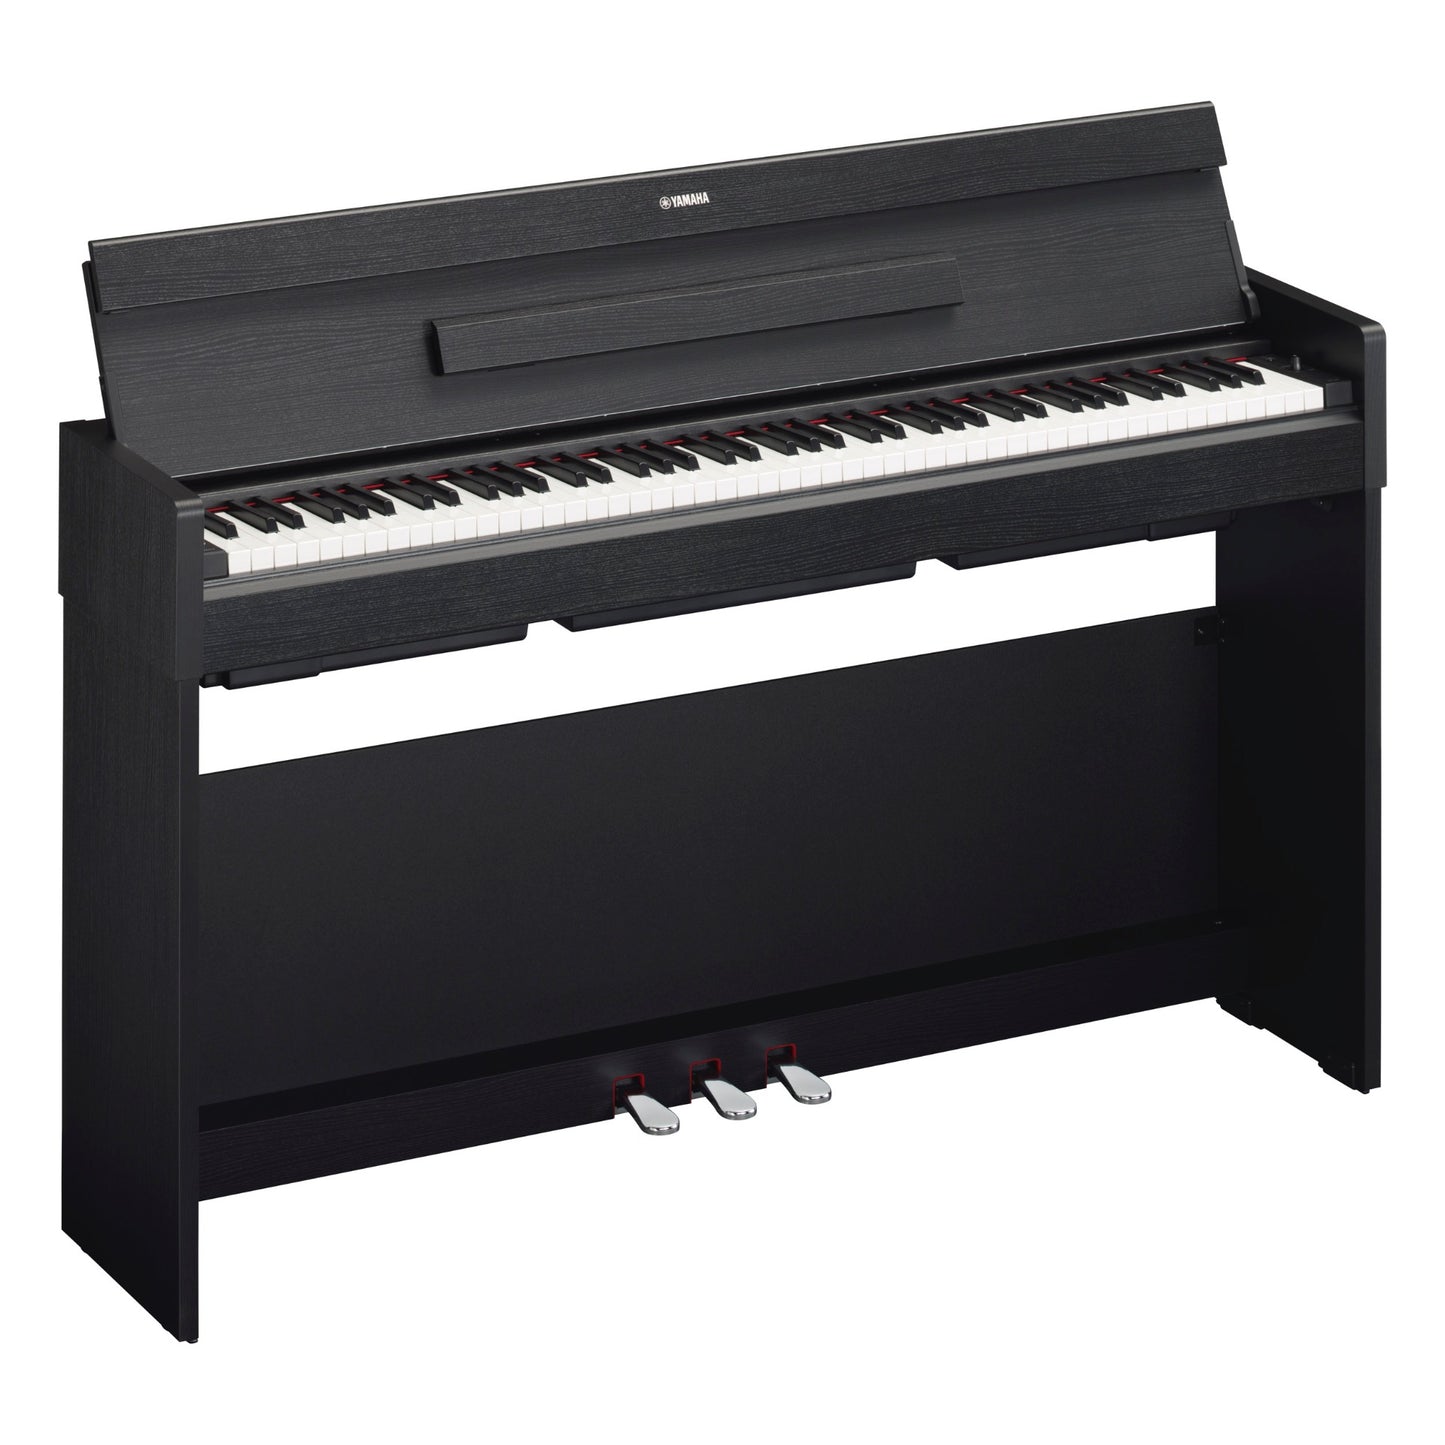 Yamaha YDPS35B 88-Note, Weighted Action Console Digital Piano - Black Walnut